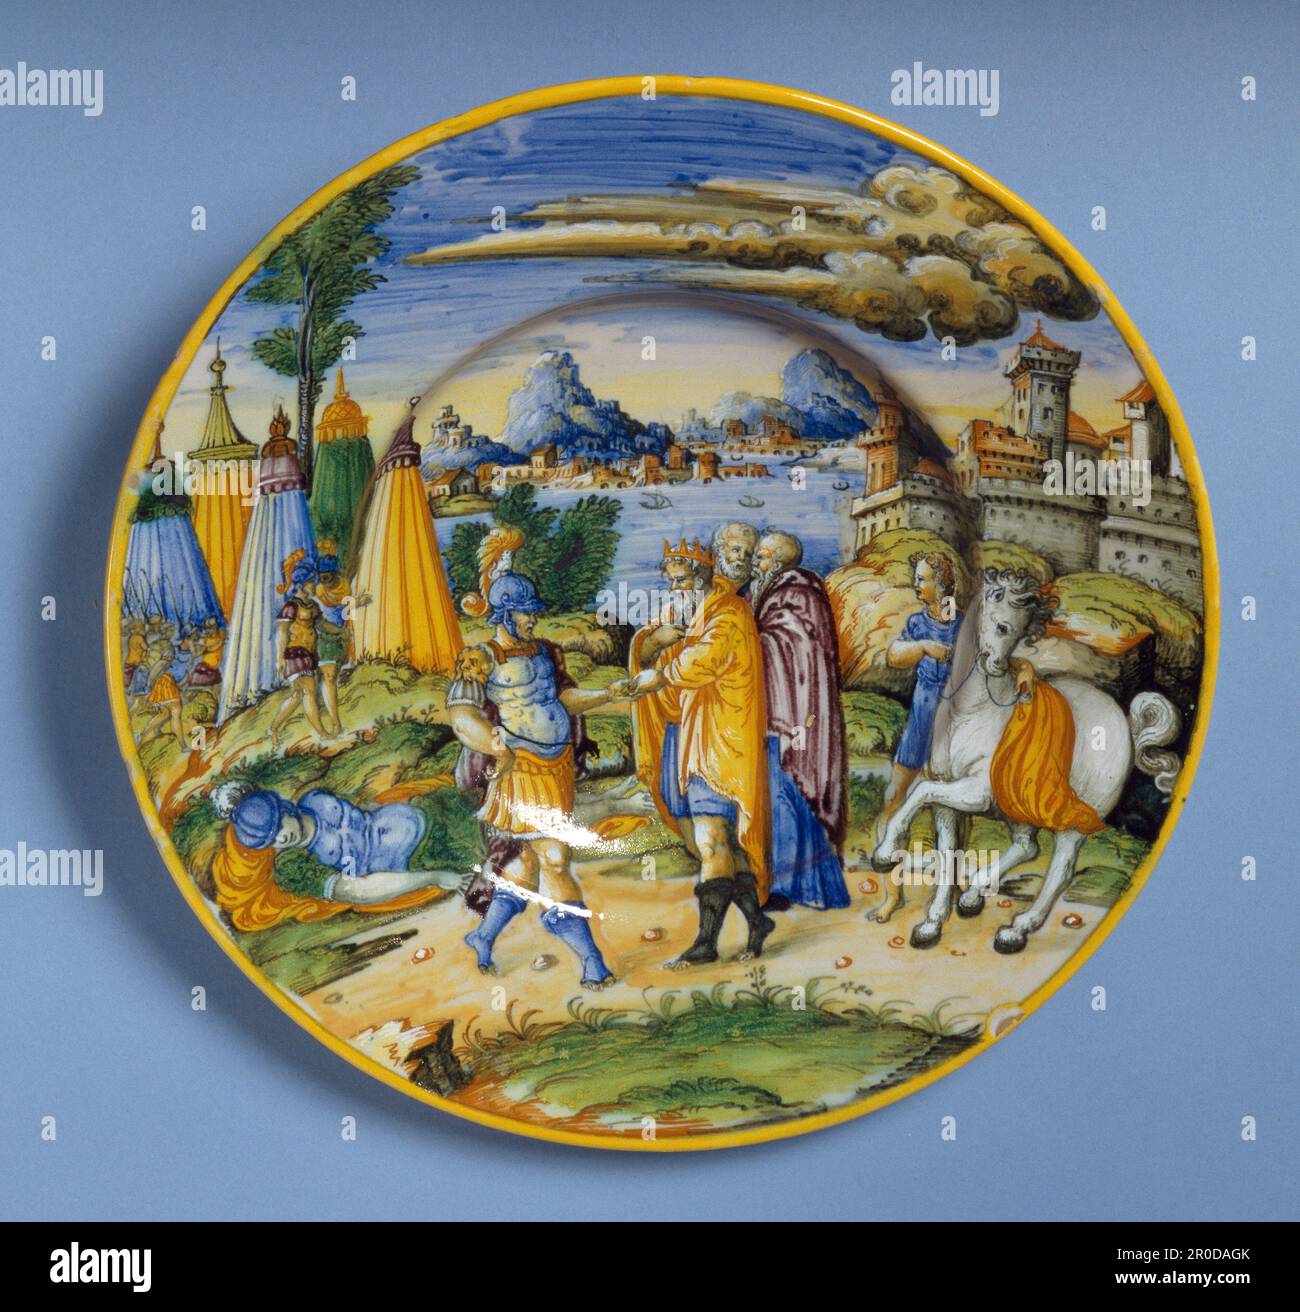 [Front]. The Legend of Hector, 1550-1560. Attributed to Fontana Workshop, Italy, Urbino. A Maiolica, tin-glazed earthenware plate with a circular section. Painted scene shows Priam paying a ransom for the body of his son, Hector, who was killed during the siege of Troy. Stock Photo